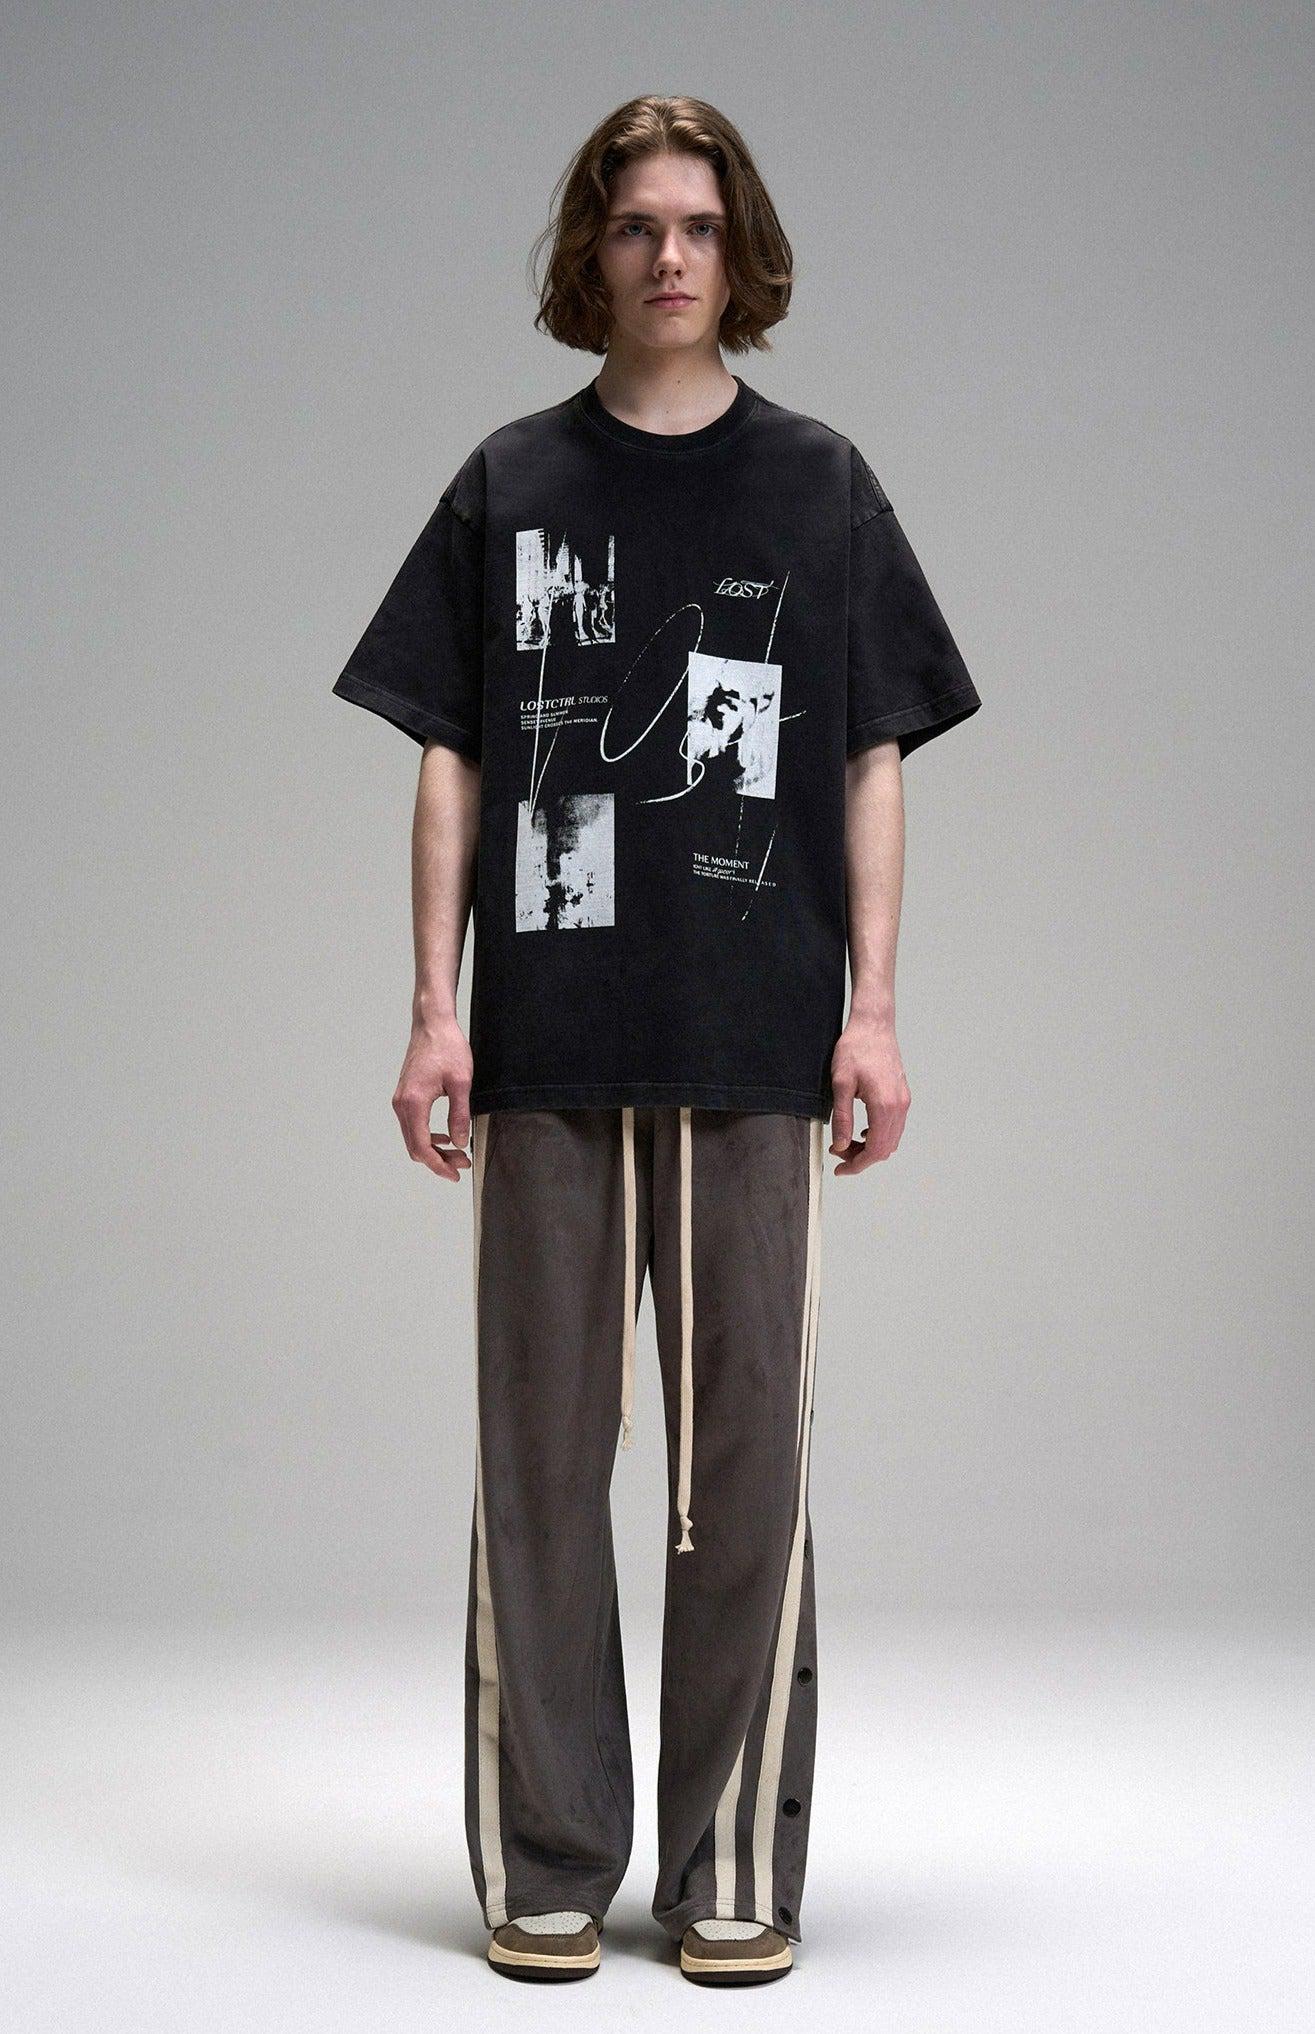 Washed Portrait T-Shirt Korean Street Fashion T-Shirt By Lost CTRL Shop Online at OH Vault